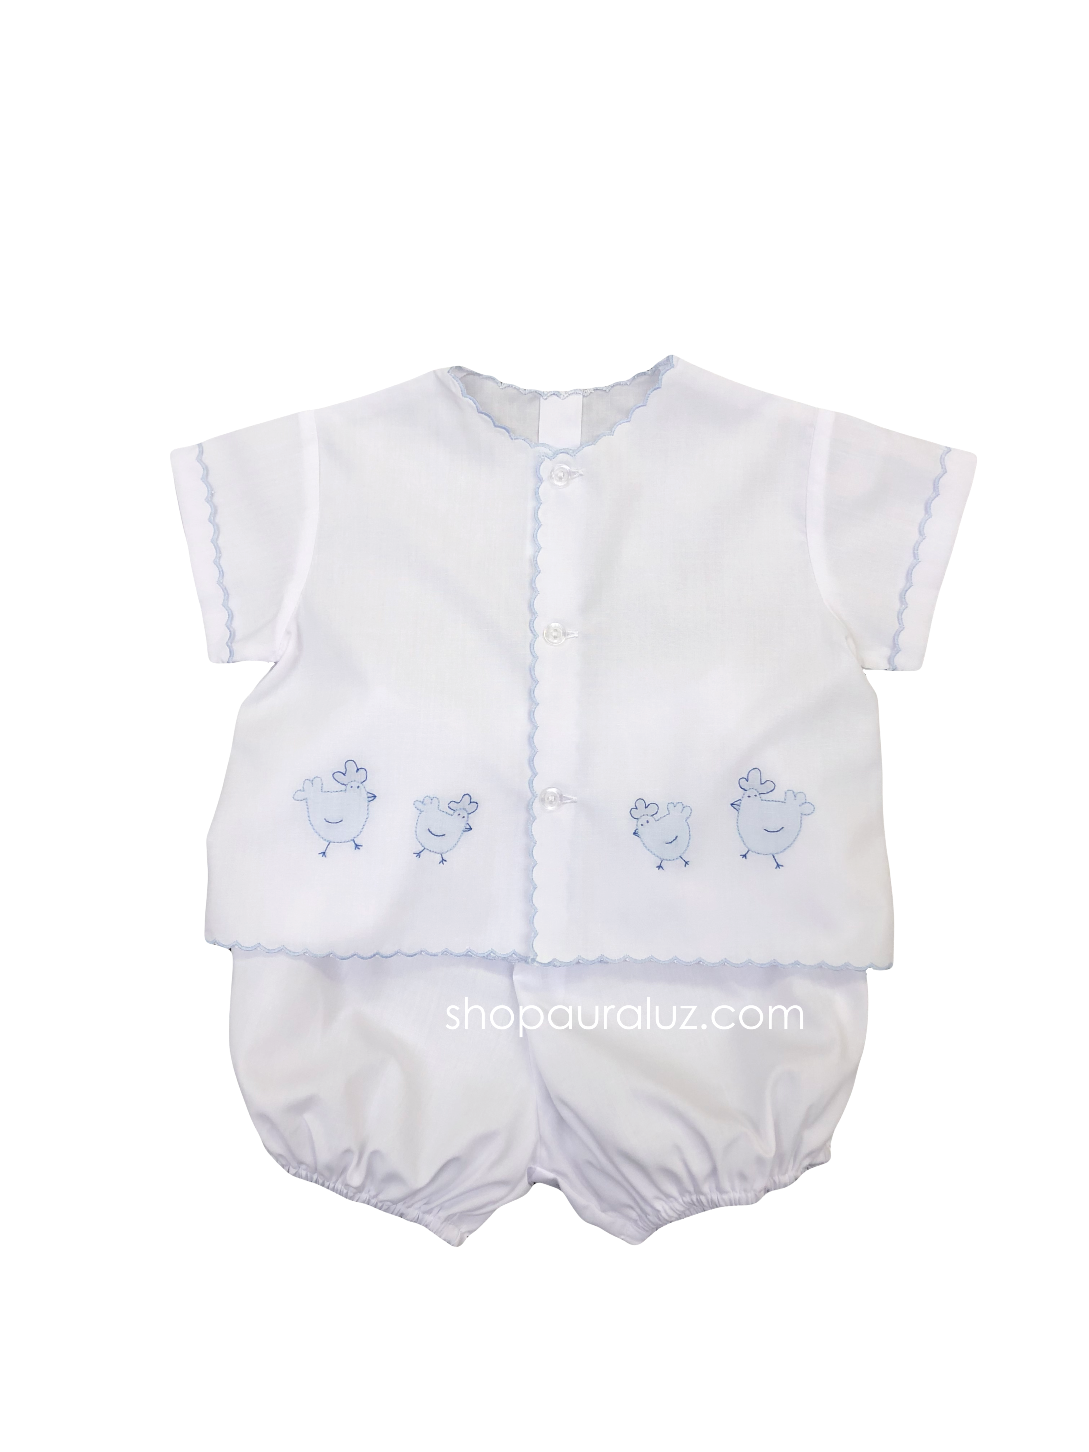 Auraluz Diaper shirt/bloomer set...White with blue scallops(white bloomers) and embroidered chickens